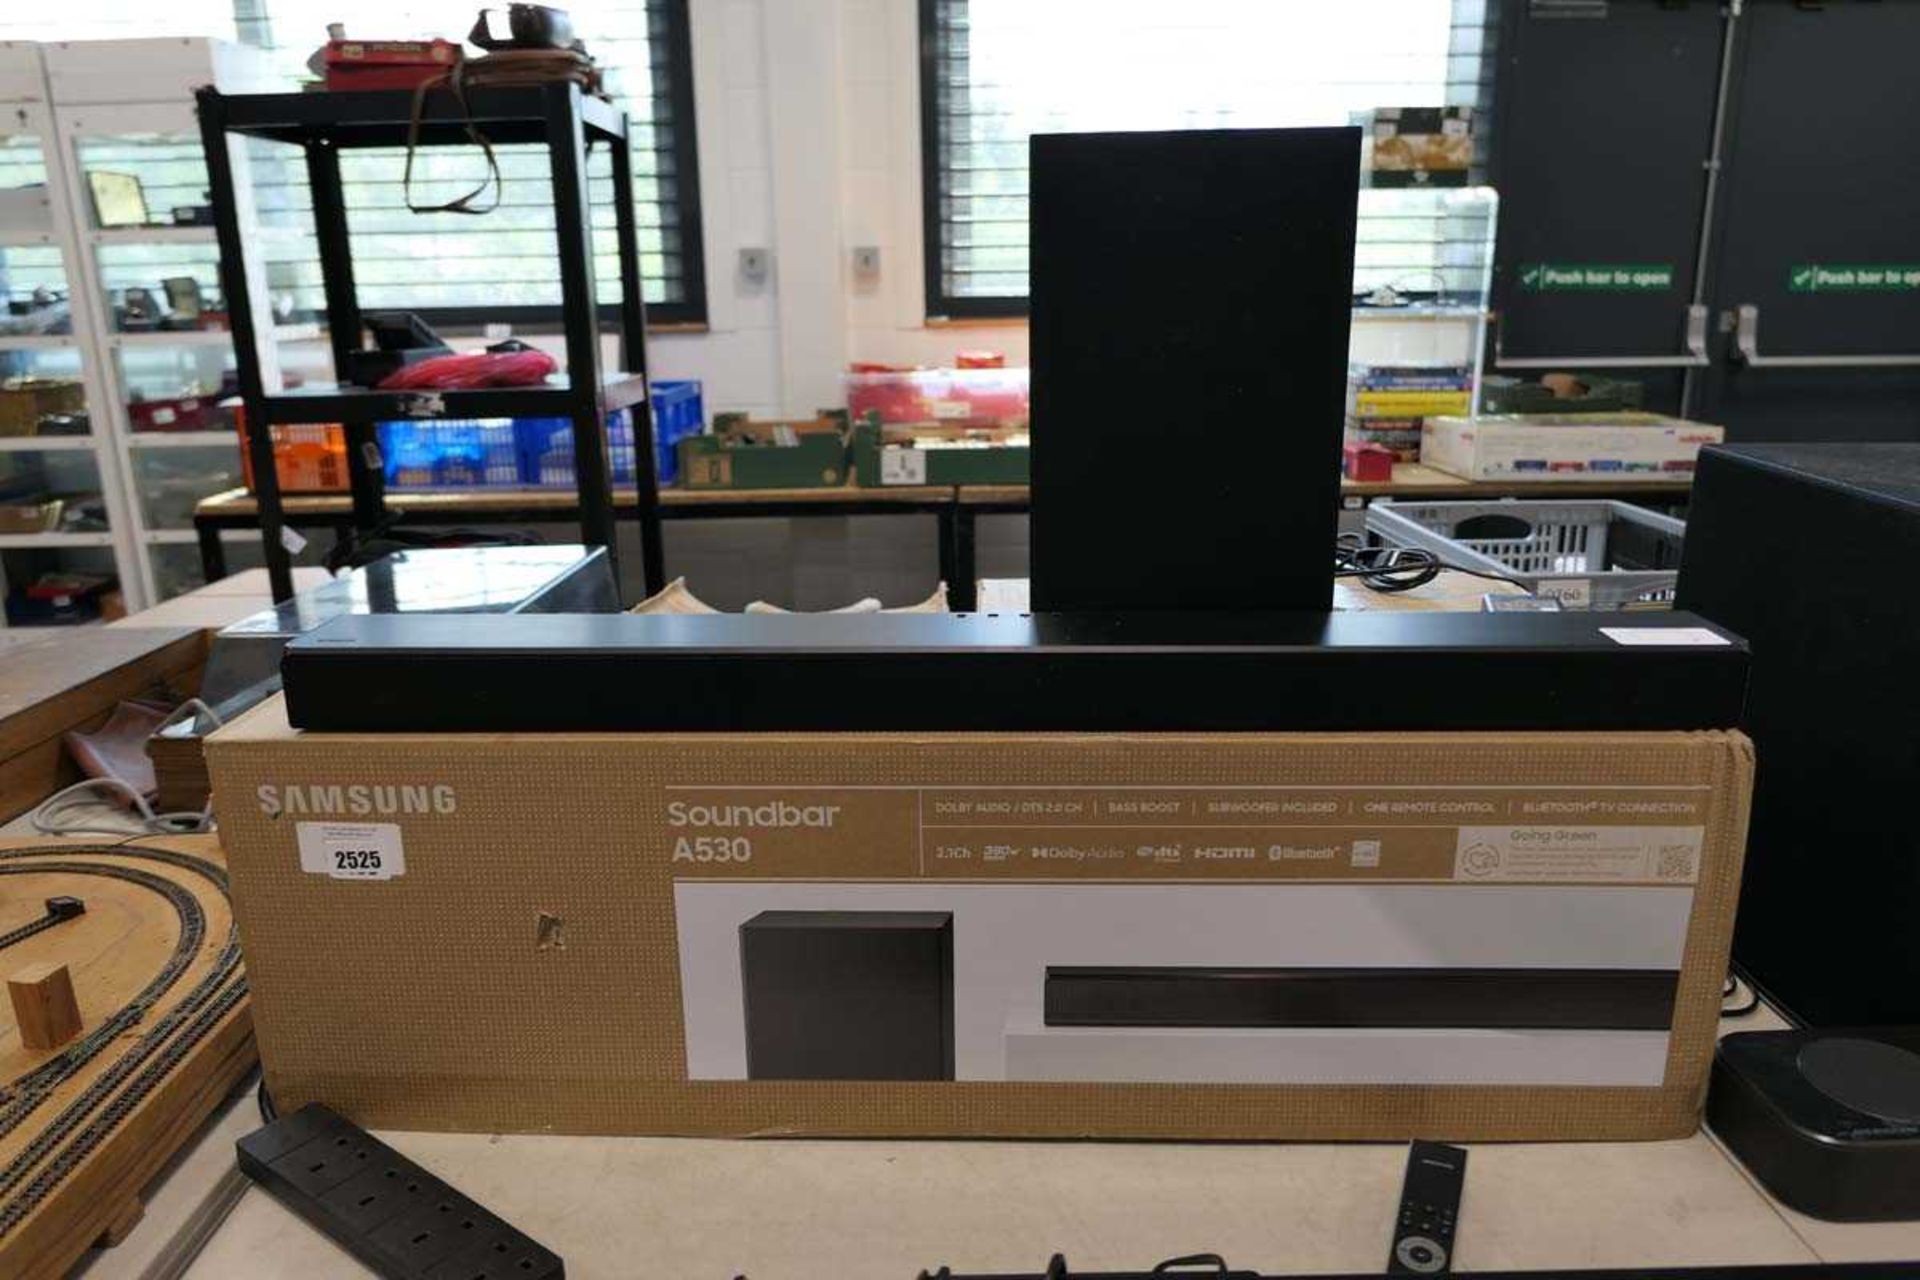 +VAT Samsung soundbar A530 with box, power cable and remote